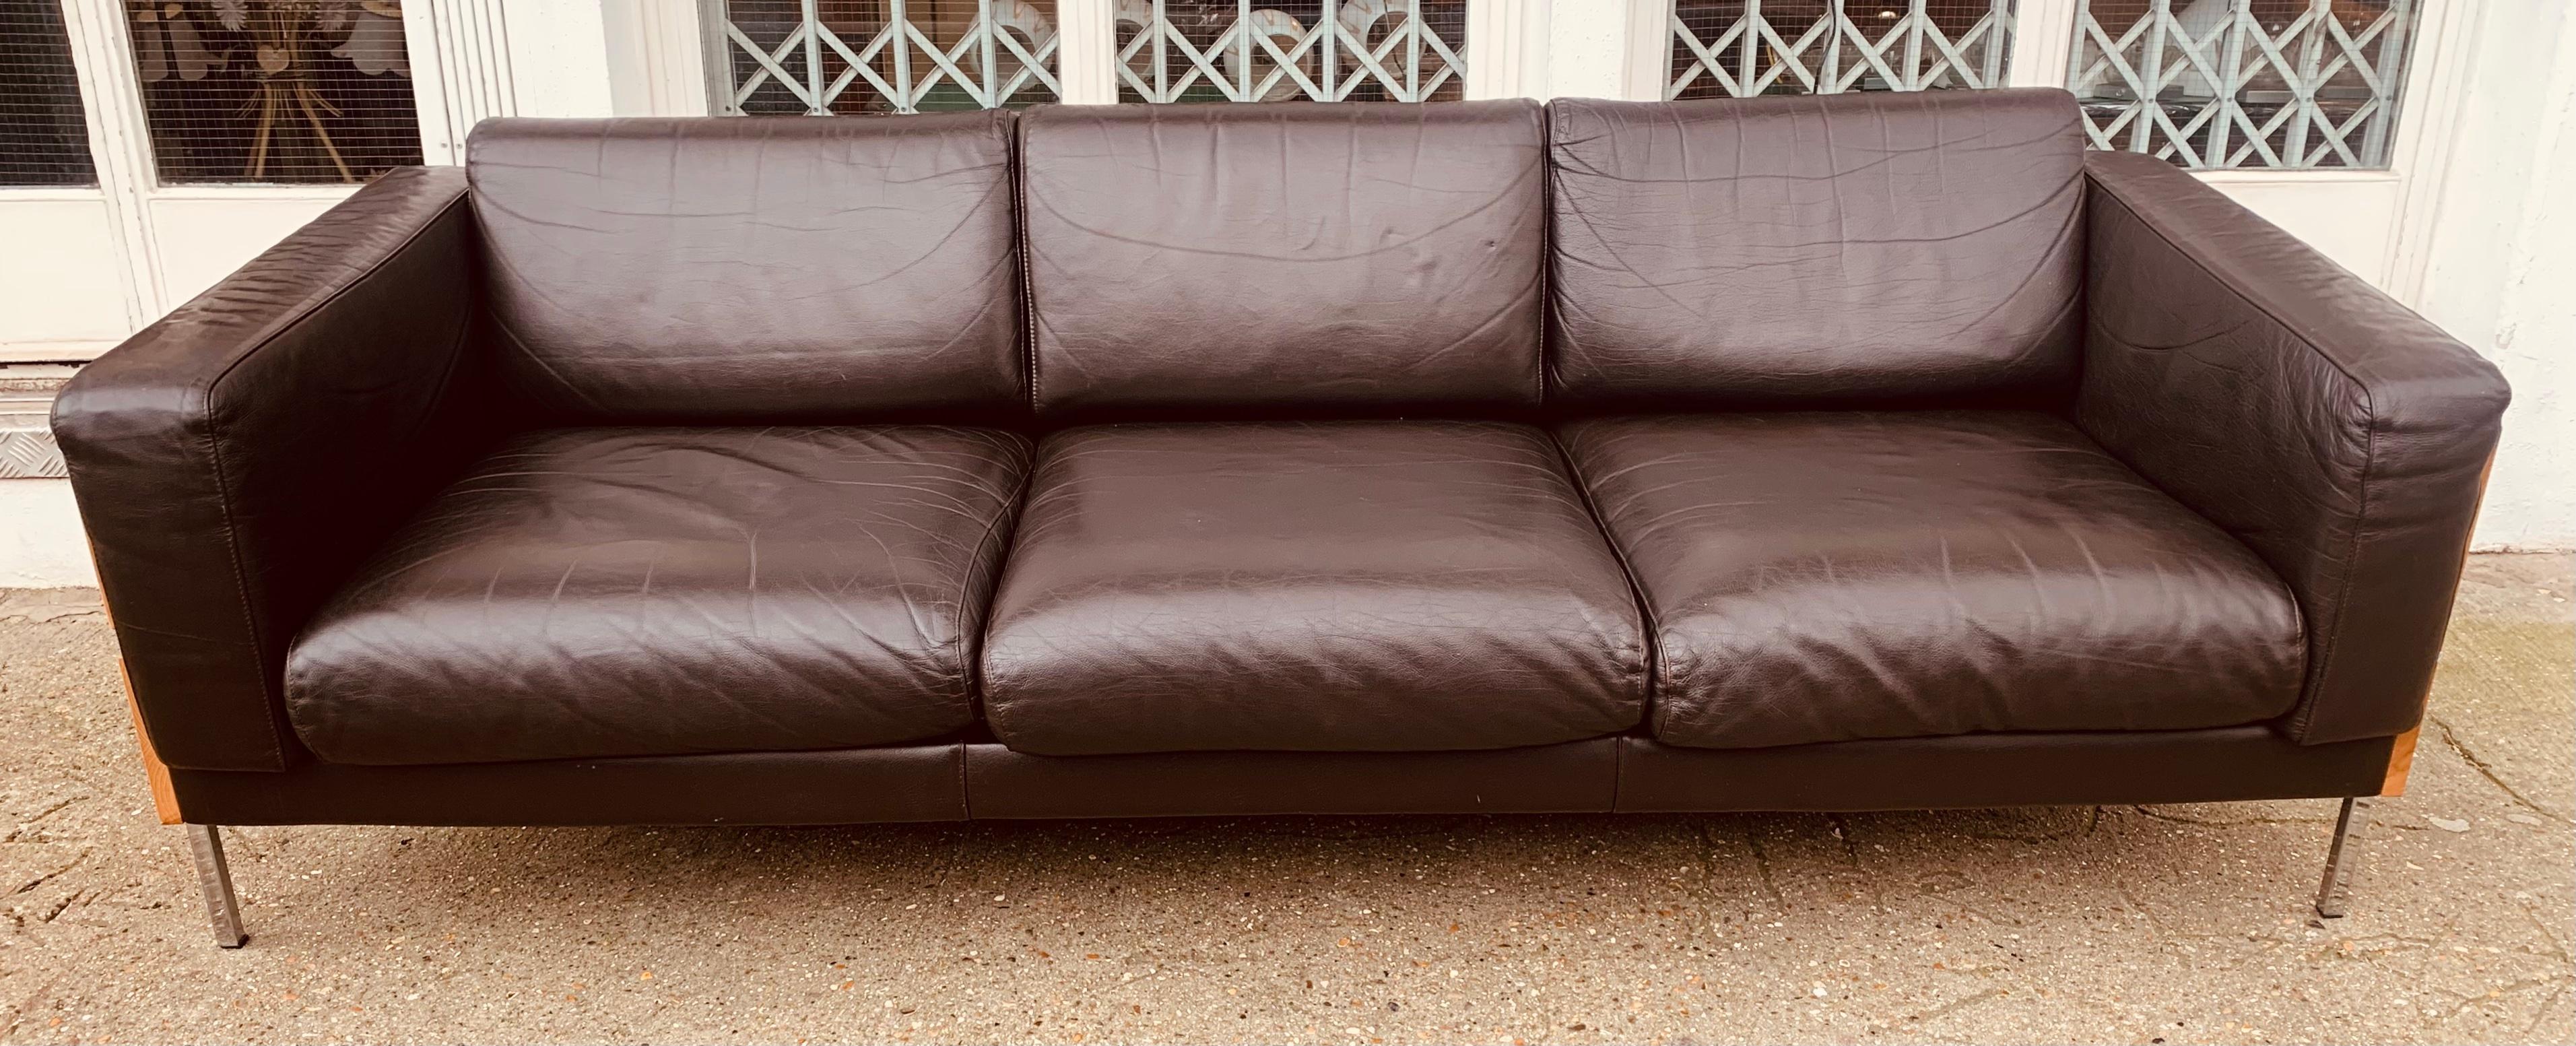 A classic and iconic 'Forum' three-seater sofa designed by Robin Day for Hille. It was originally designed in 1964 and later licensed and manufactured by Habitat in the early 2000s. The sofa is no longer available.

The soft and supple dark brown